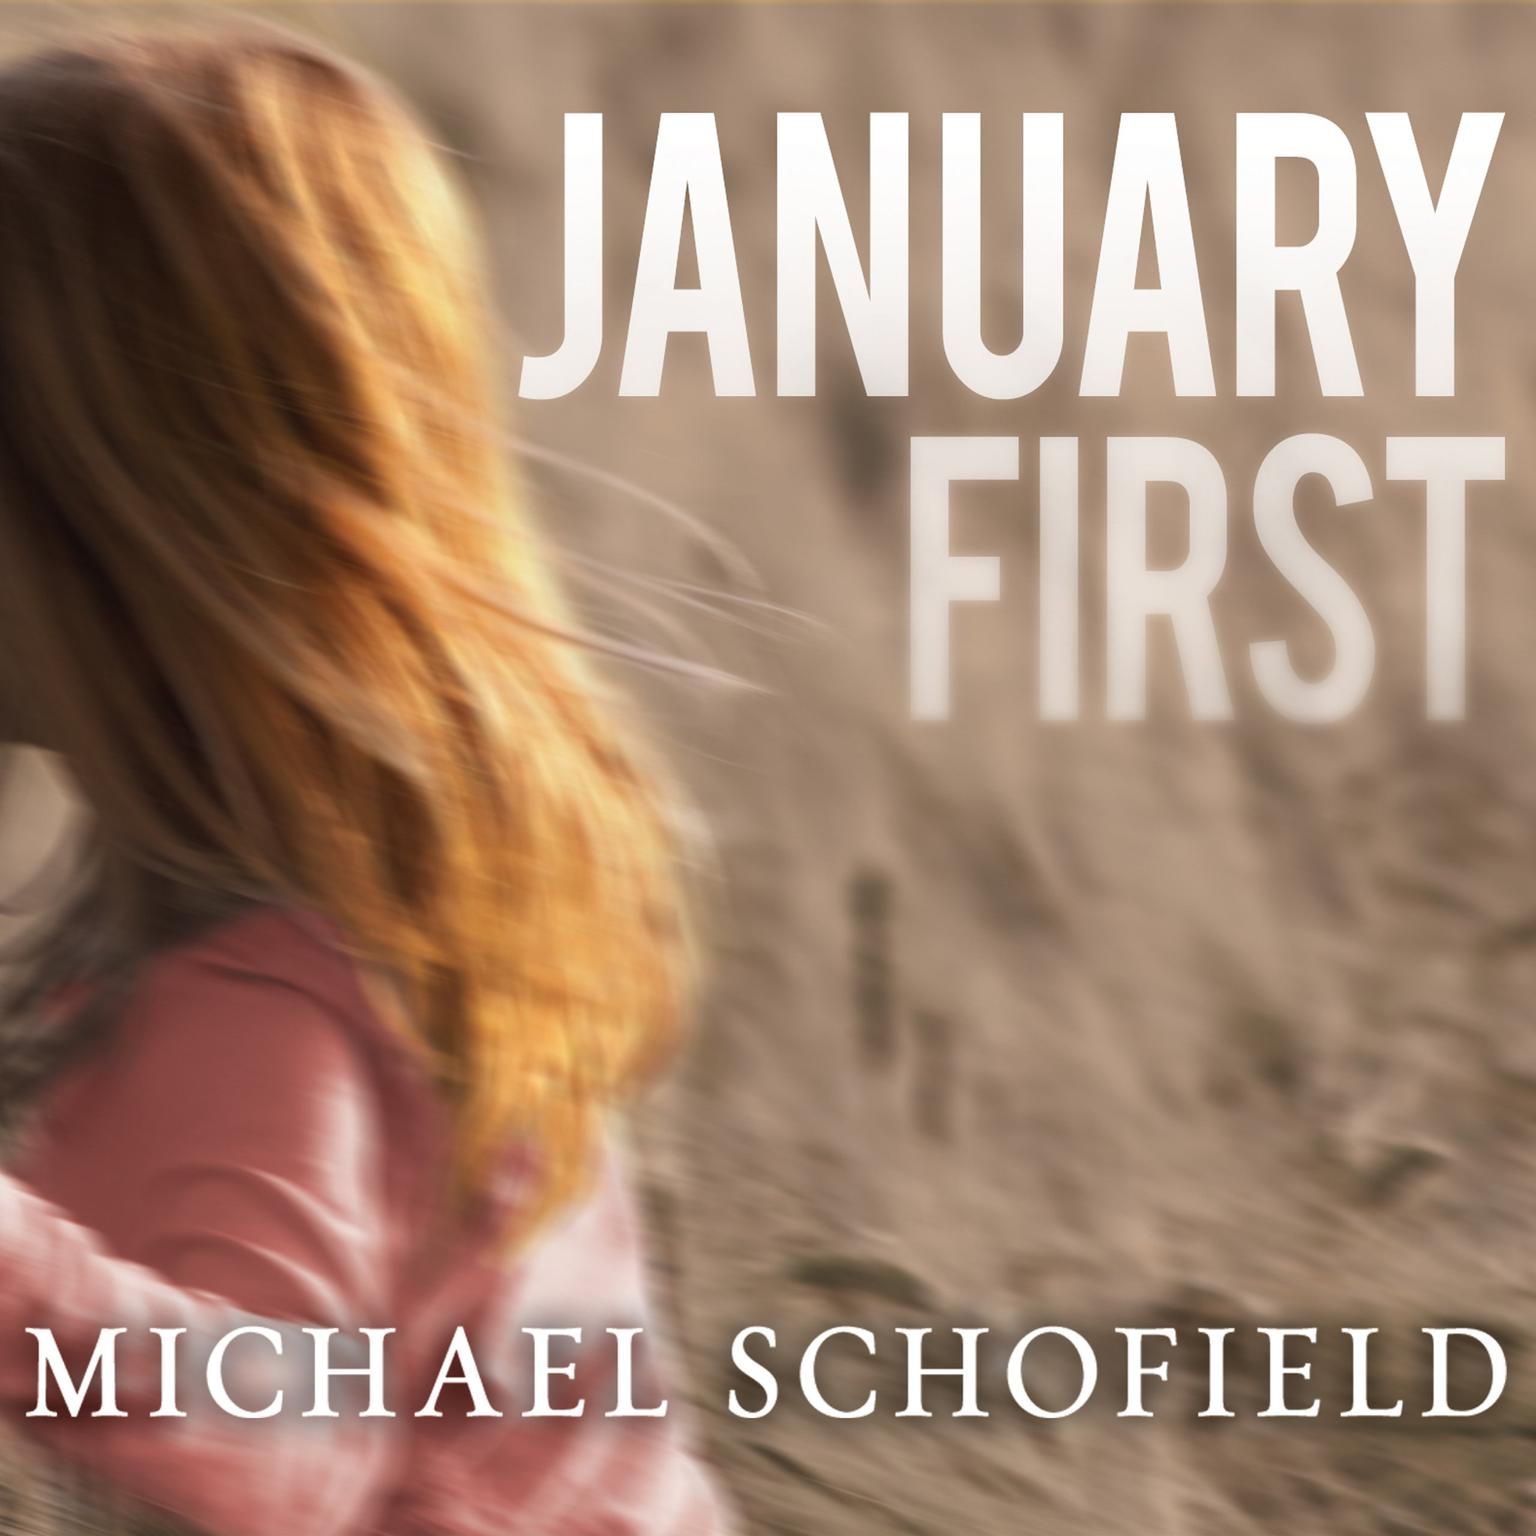 January First: A Childs Descent into Madness and Her Fathers Struggle to Save Her Audiobook, by Michael Schofield